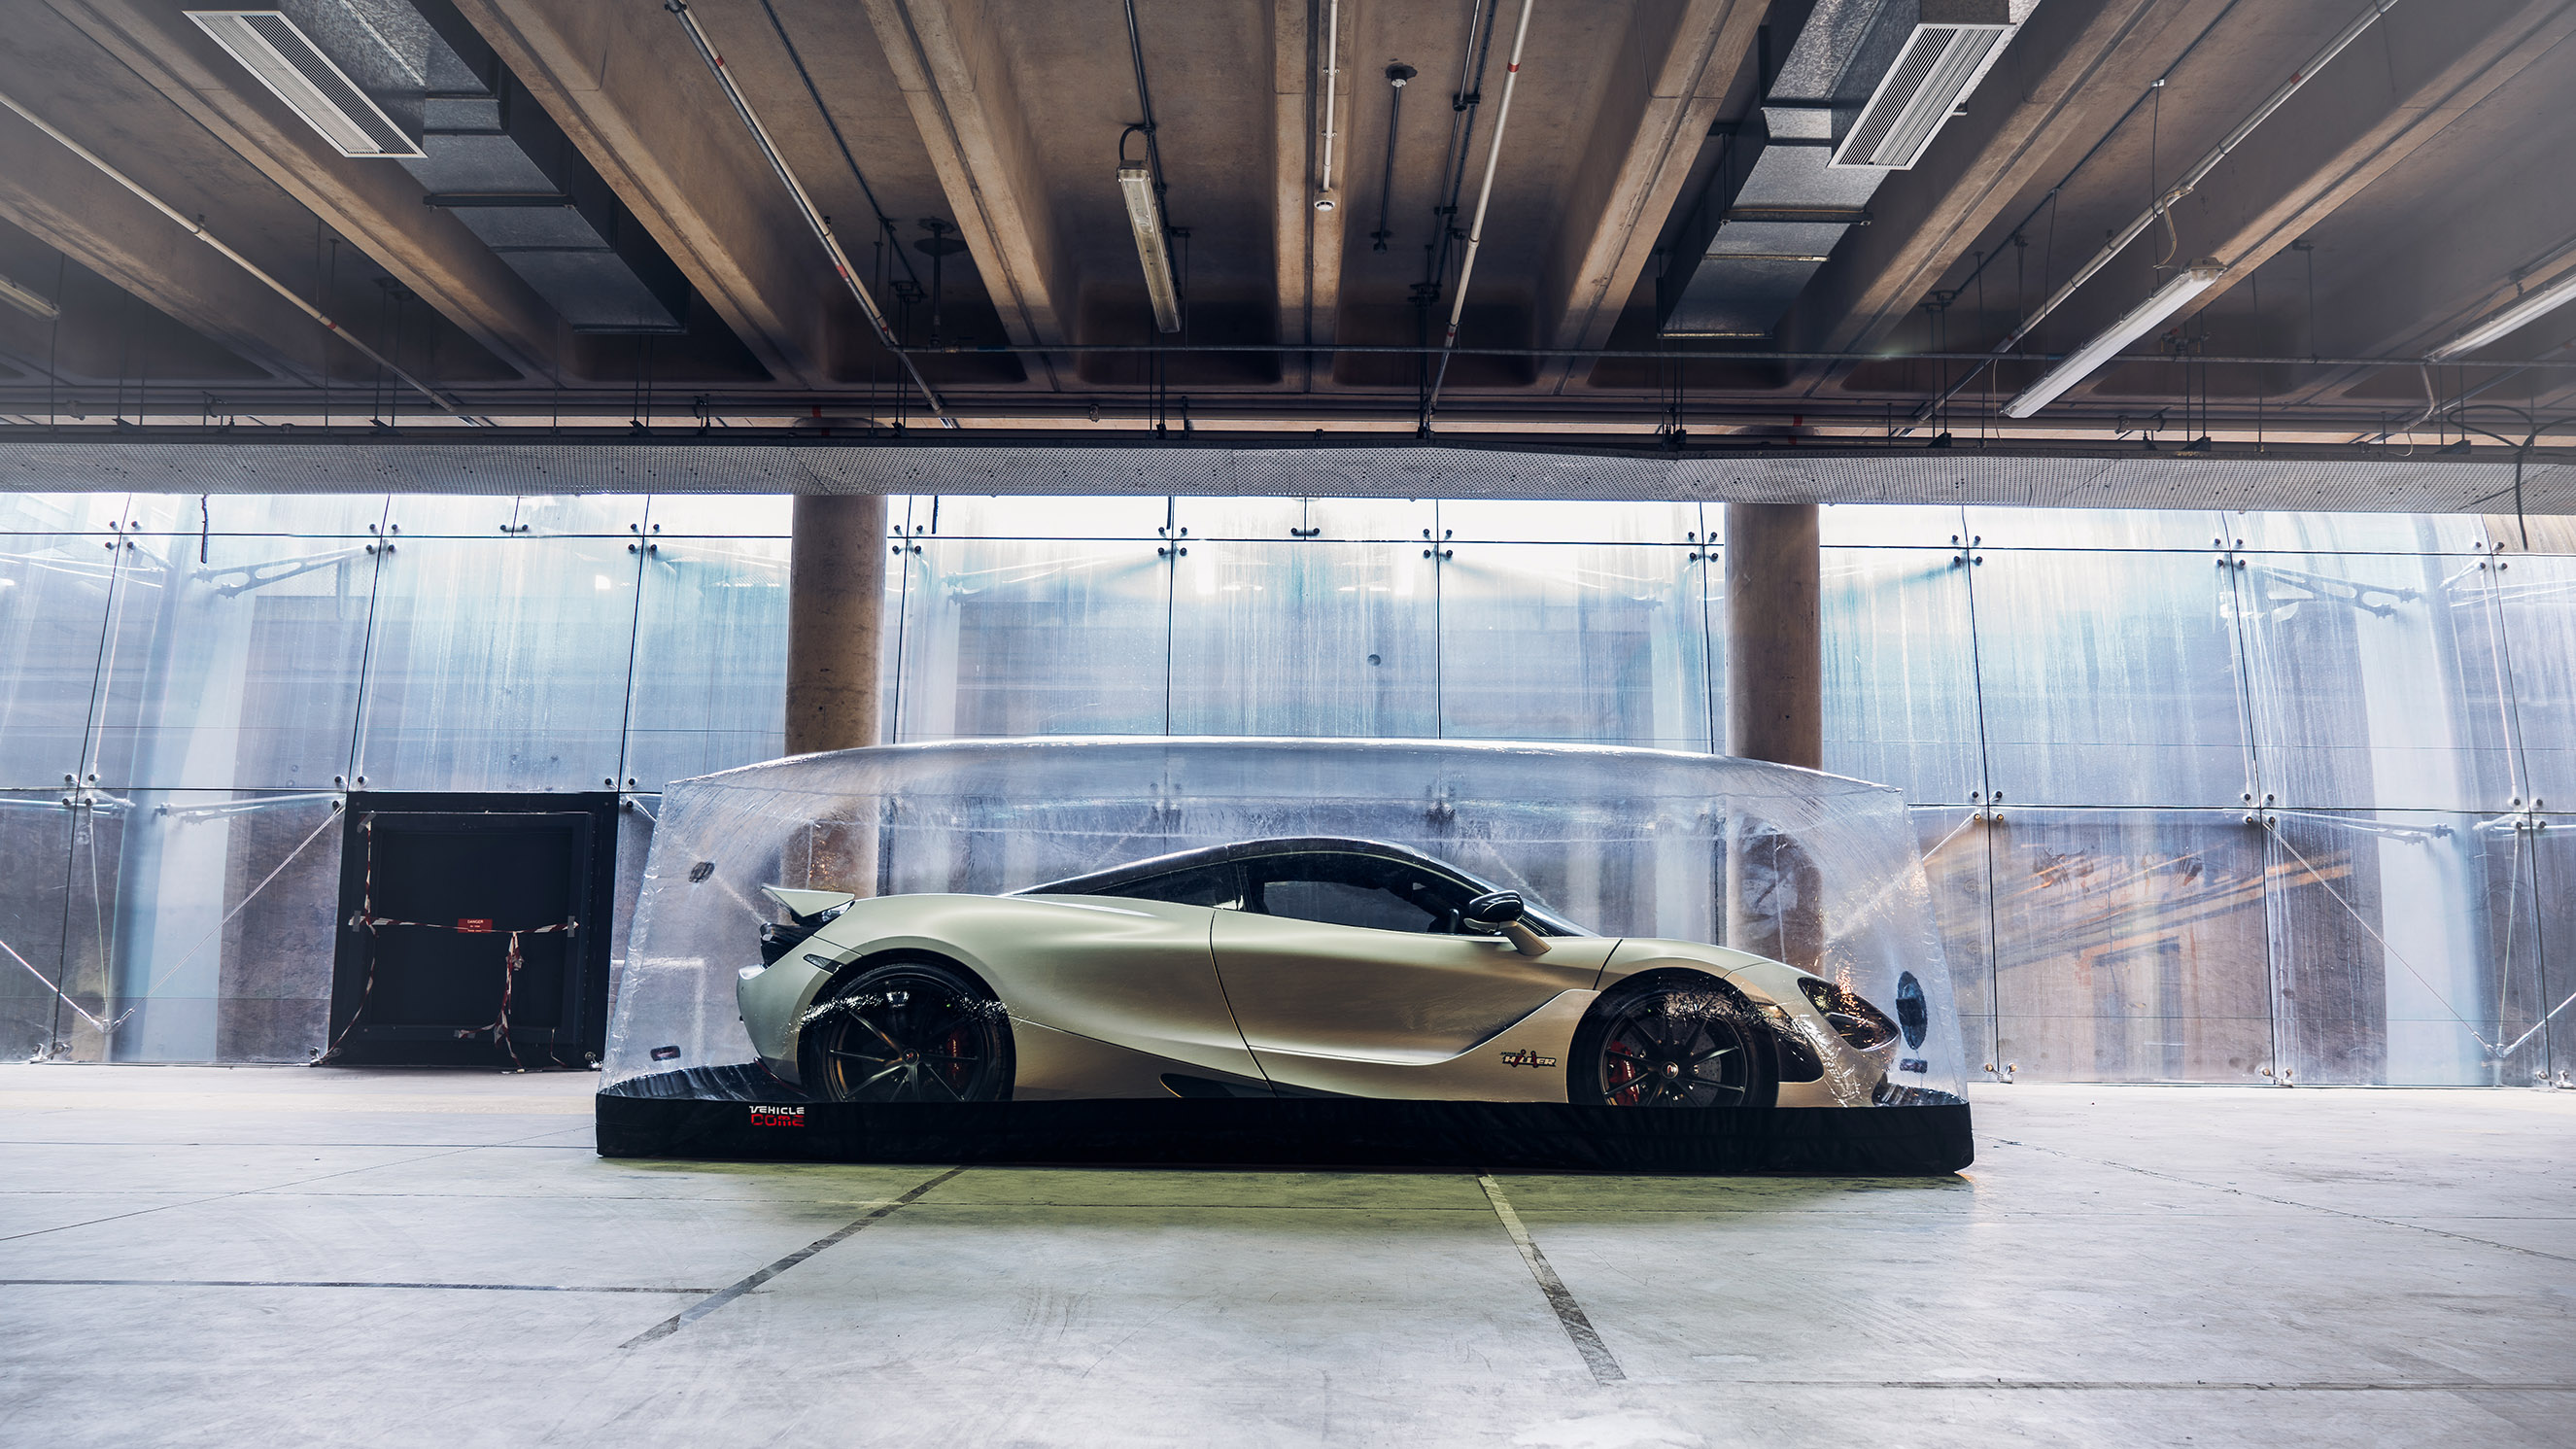 McLaren 720s in a Vehicle Dome